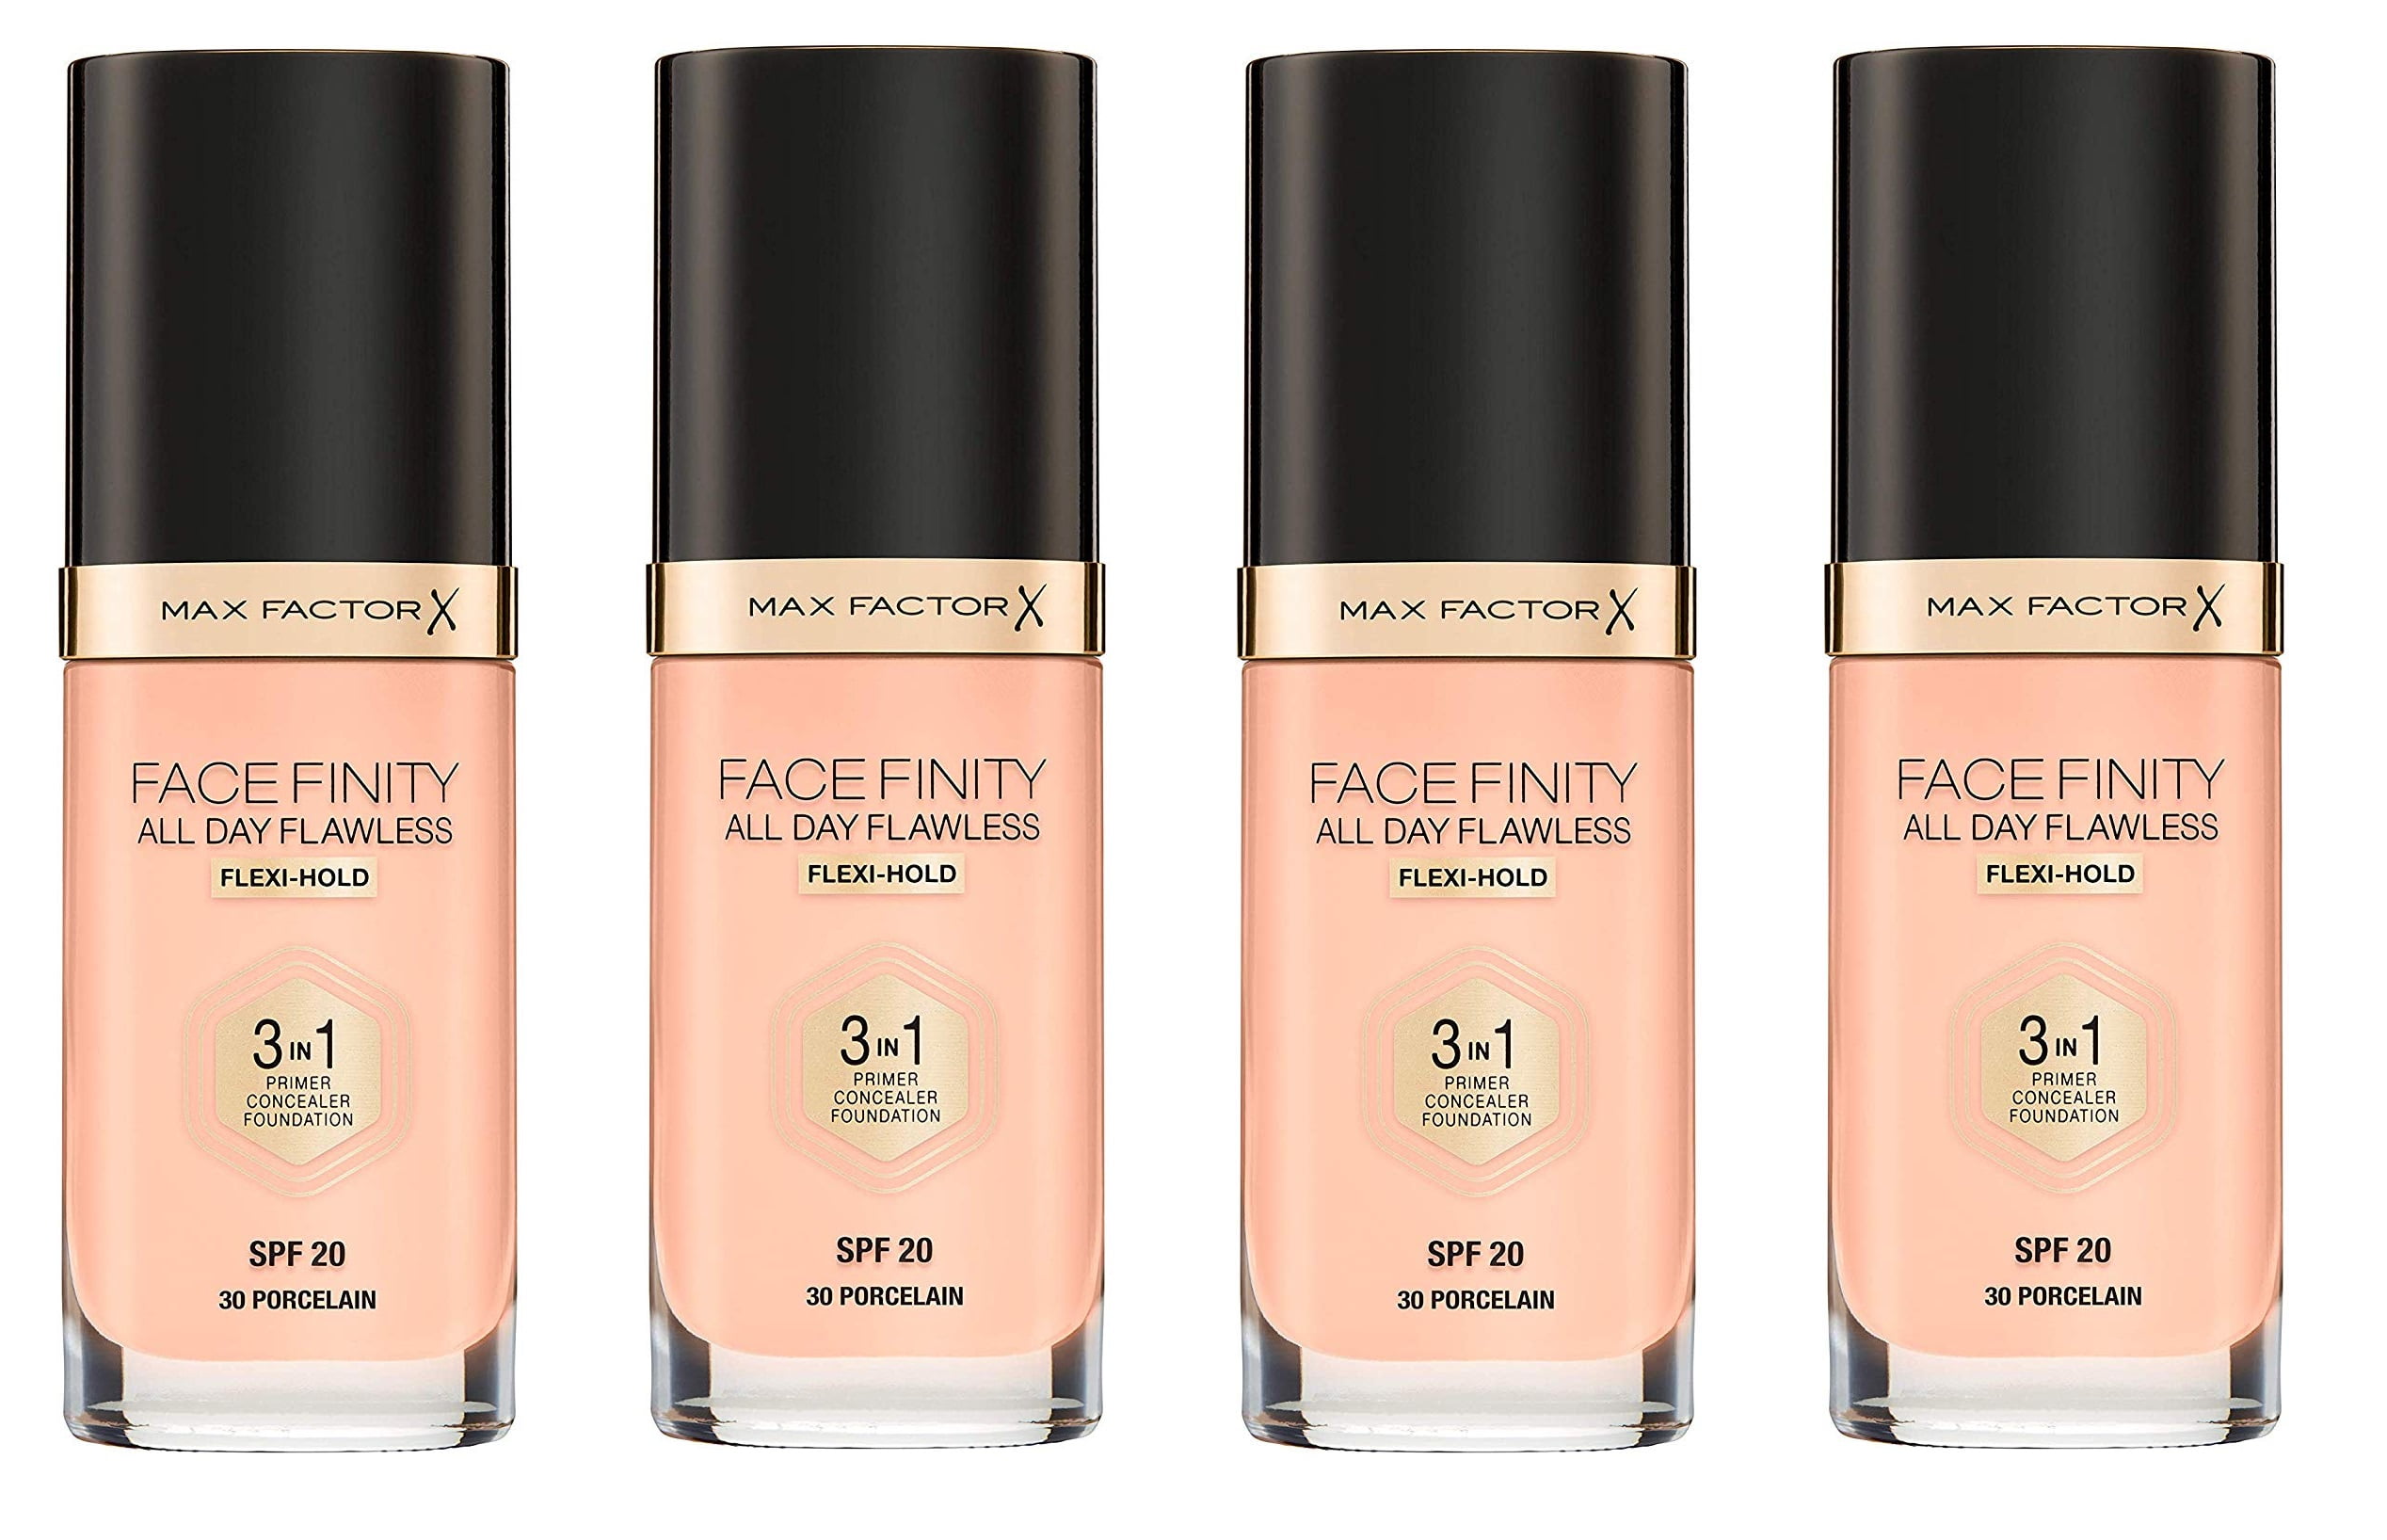 Max Factor FaceFinity All Day Flawless 3 in 1 Foundation, Primer and  Concealer, SPF 20 Porcelain 30